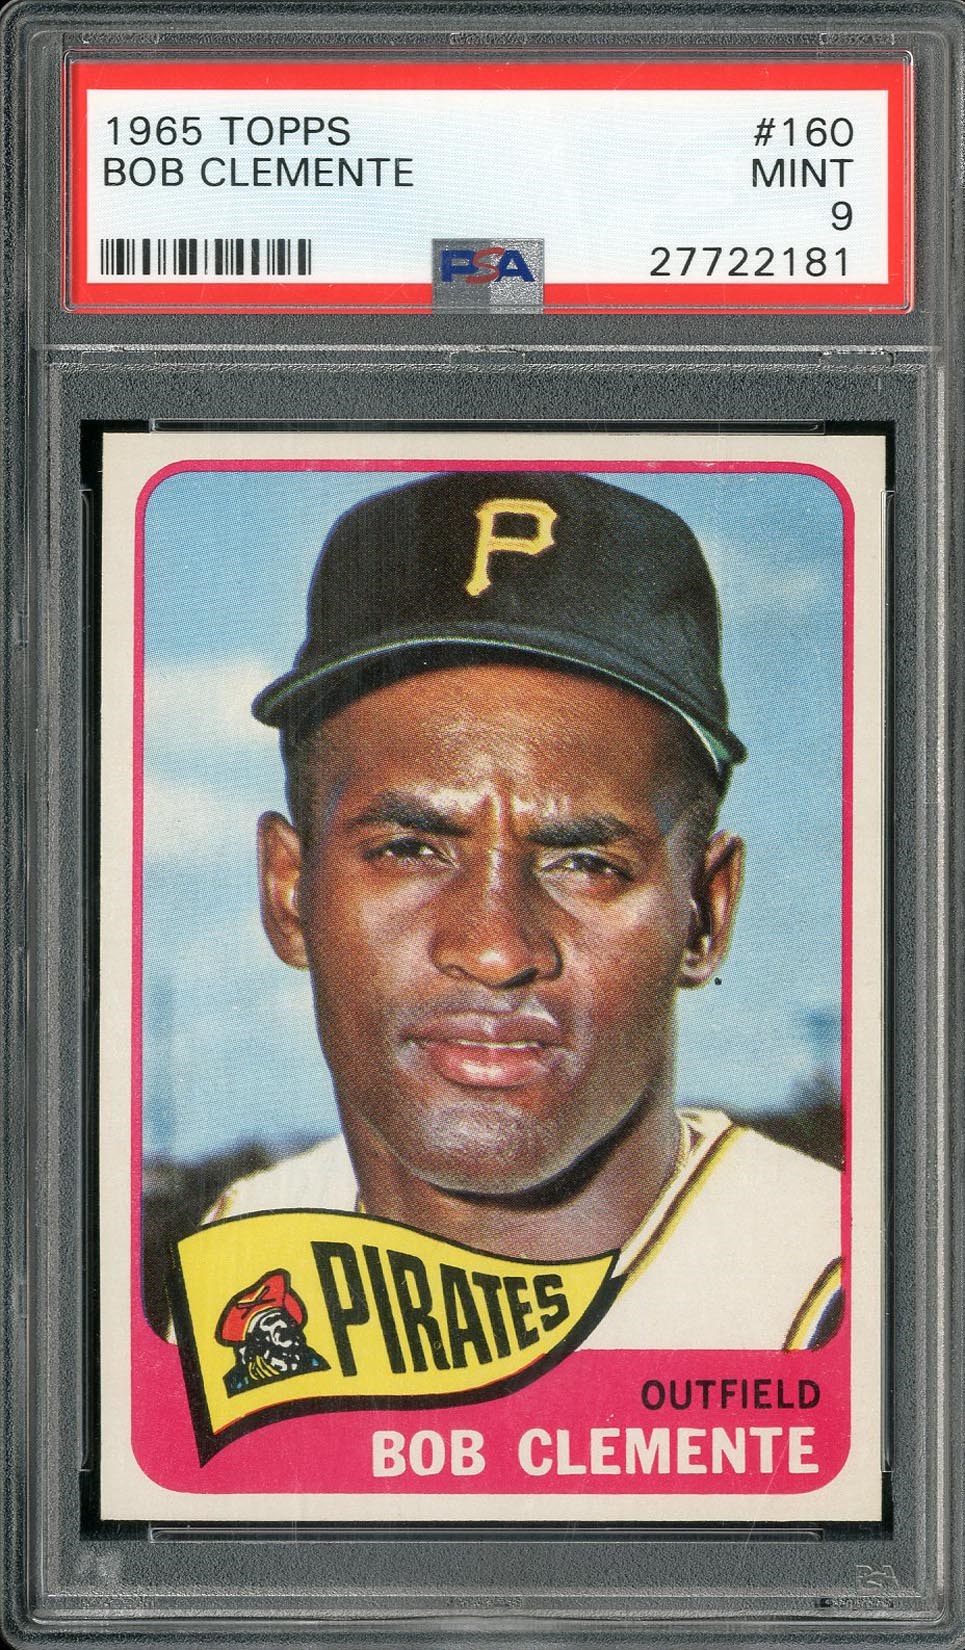 Baseball and Trading Cards - 1965 Topps #160 Roberto Clemente - PSA MINT 9